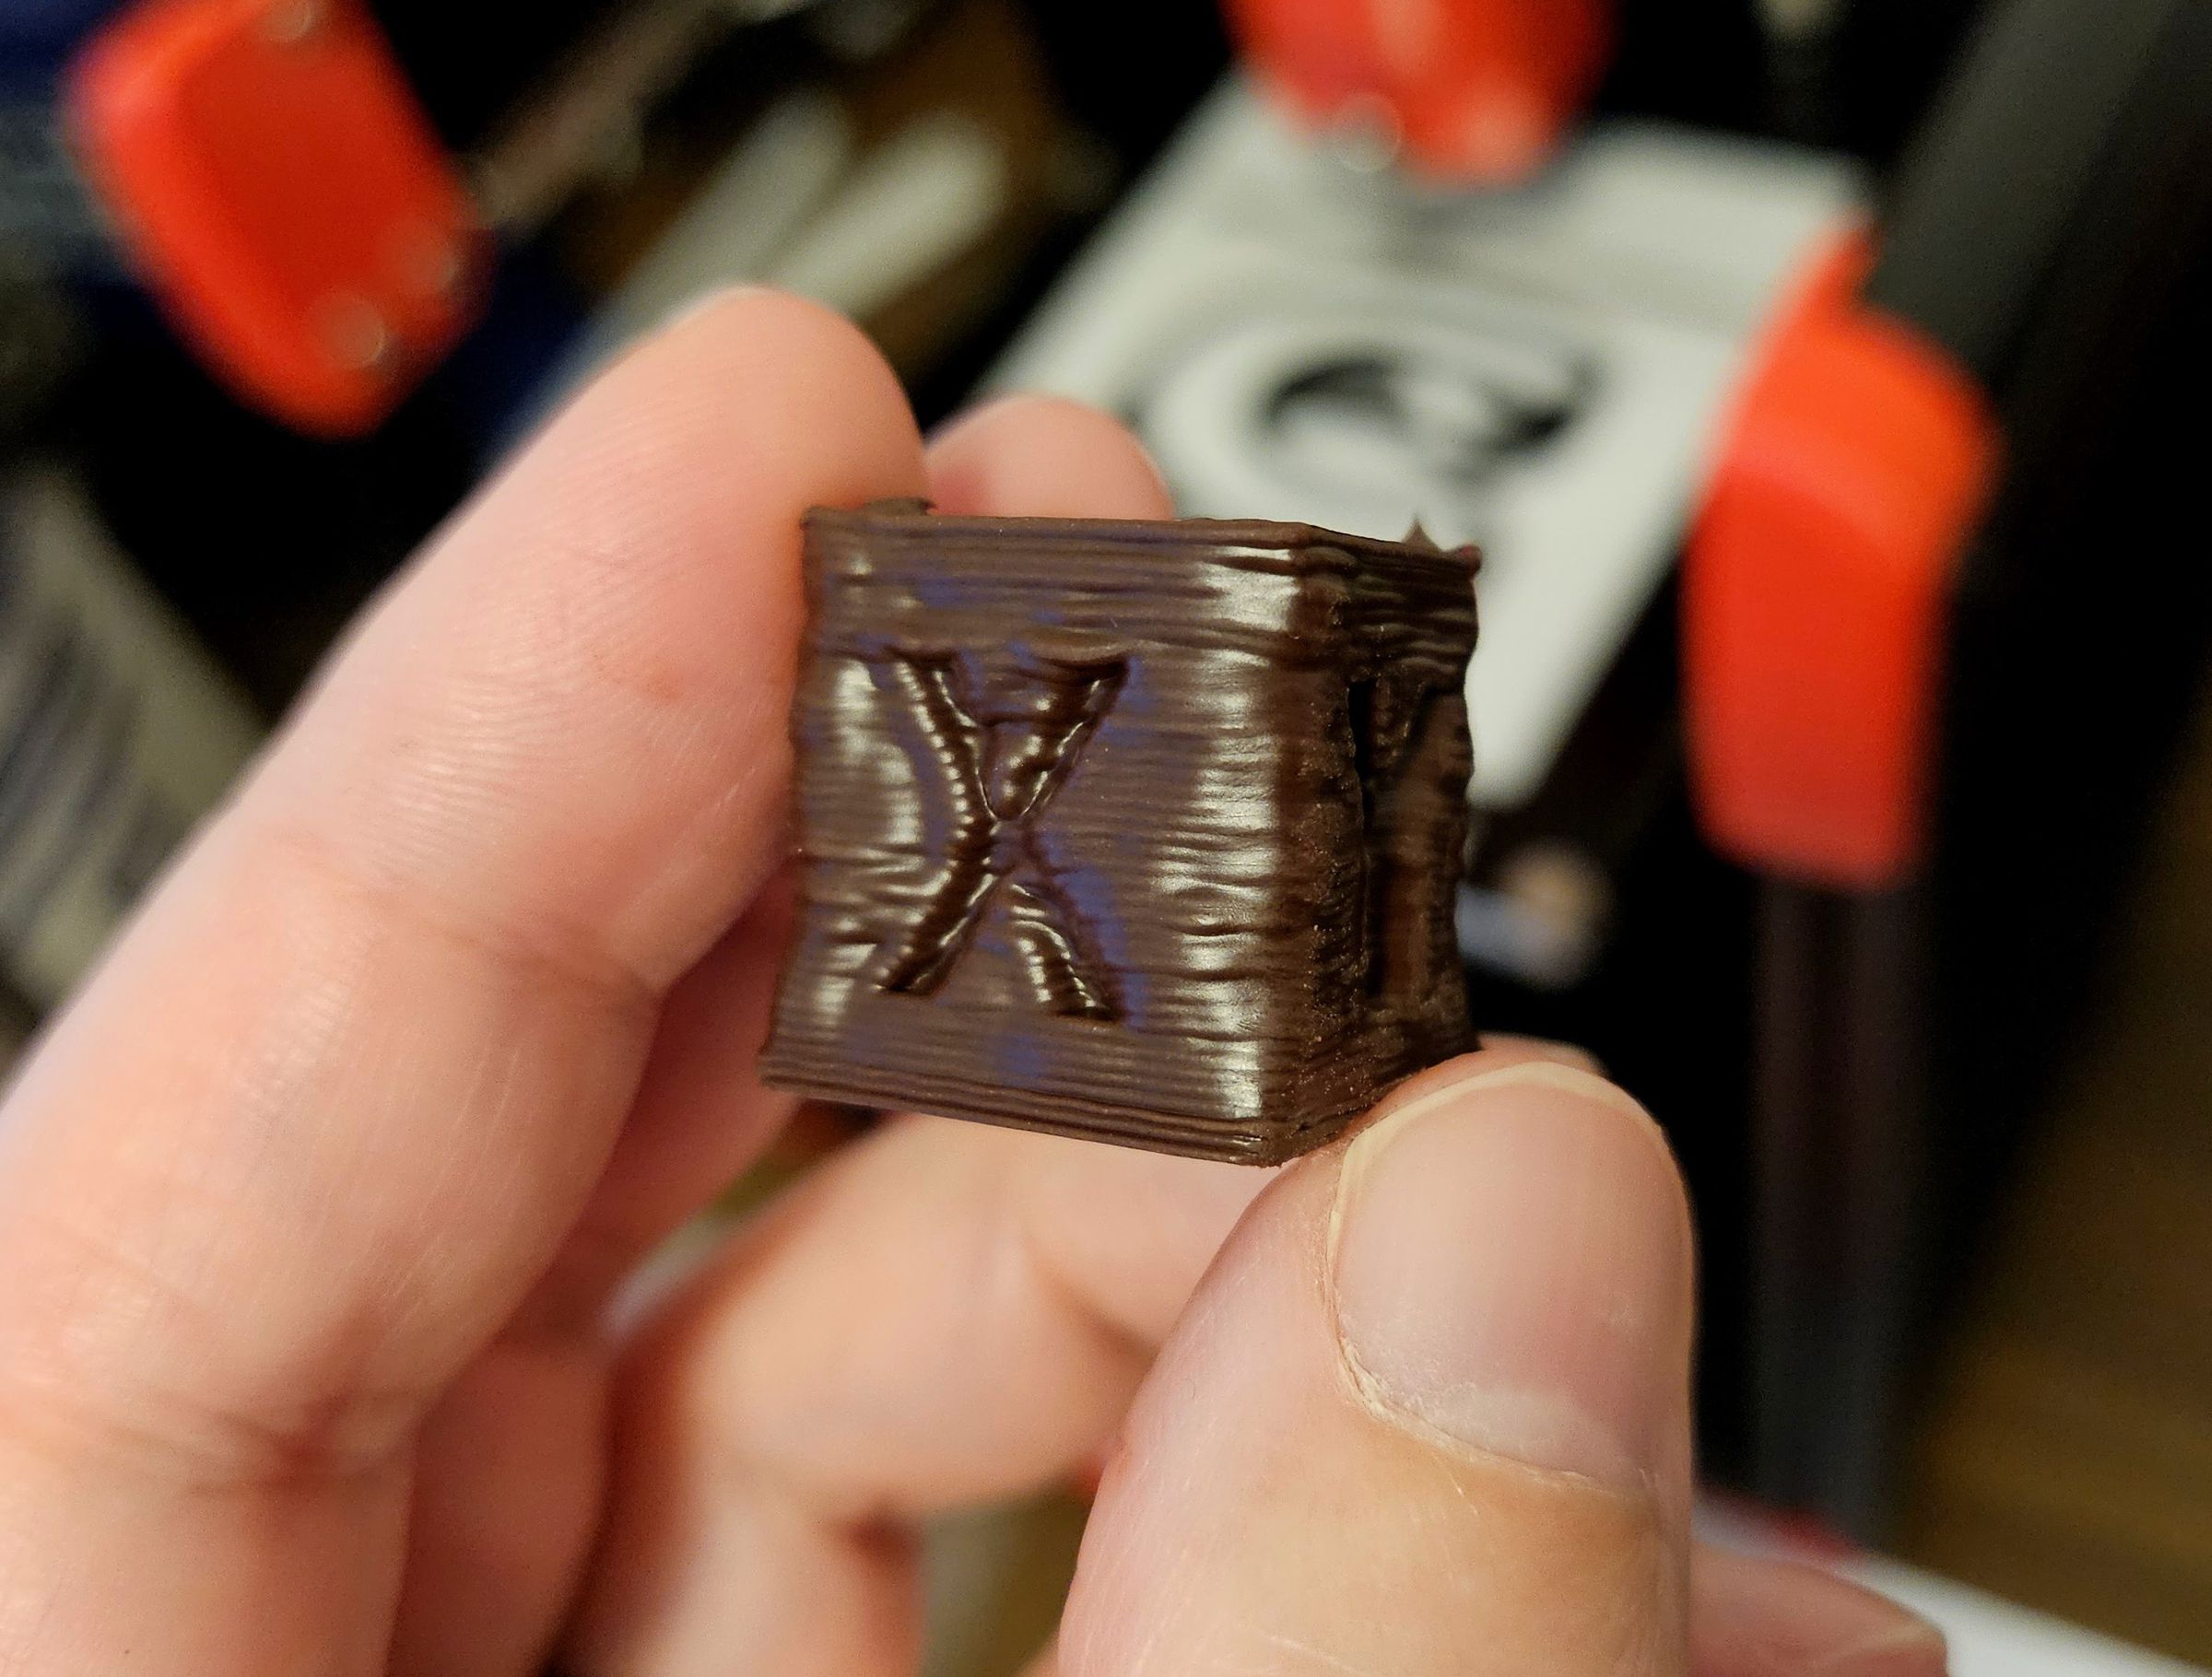 A very lumpy, too-smooth calibration cube. The glossy layers didn’t have enough time too cool.